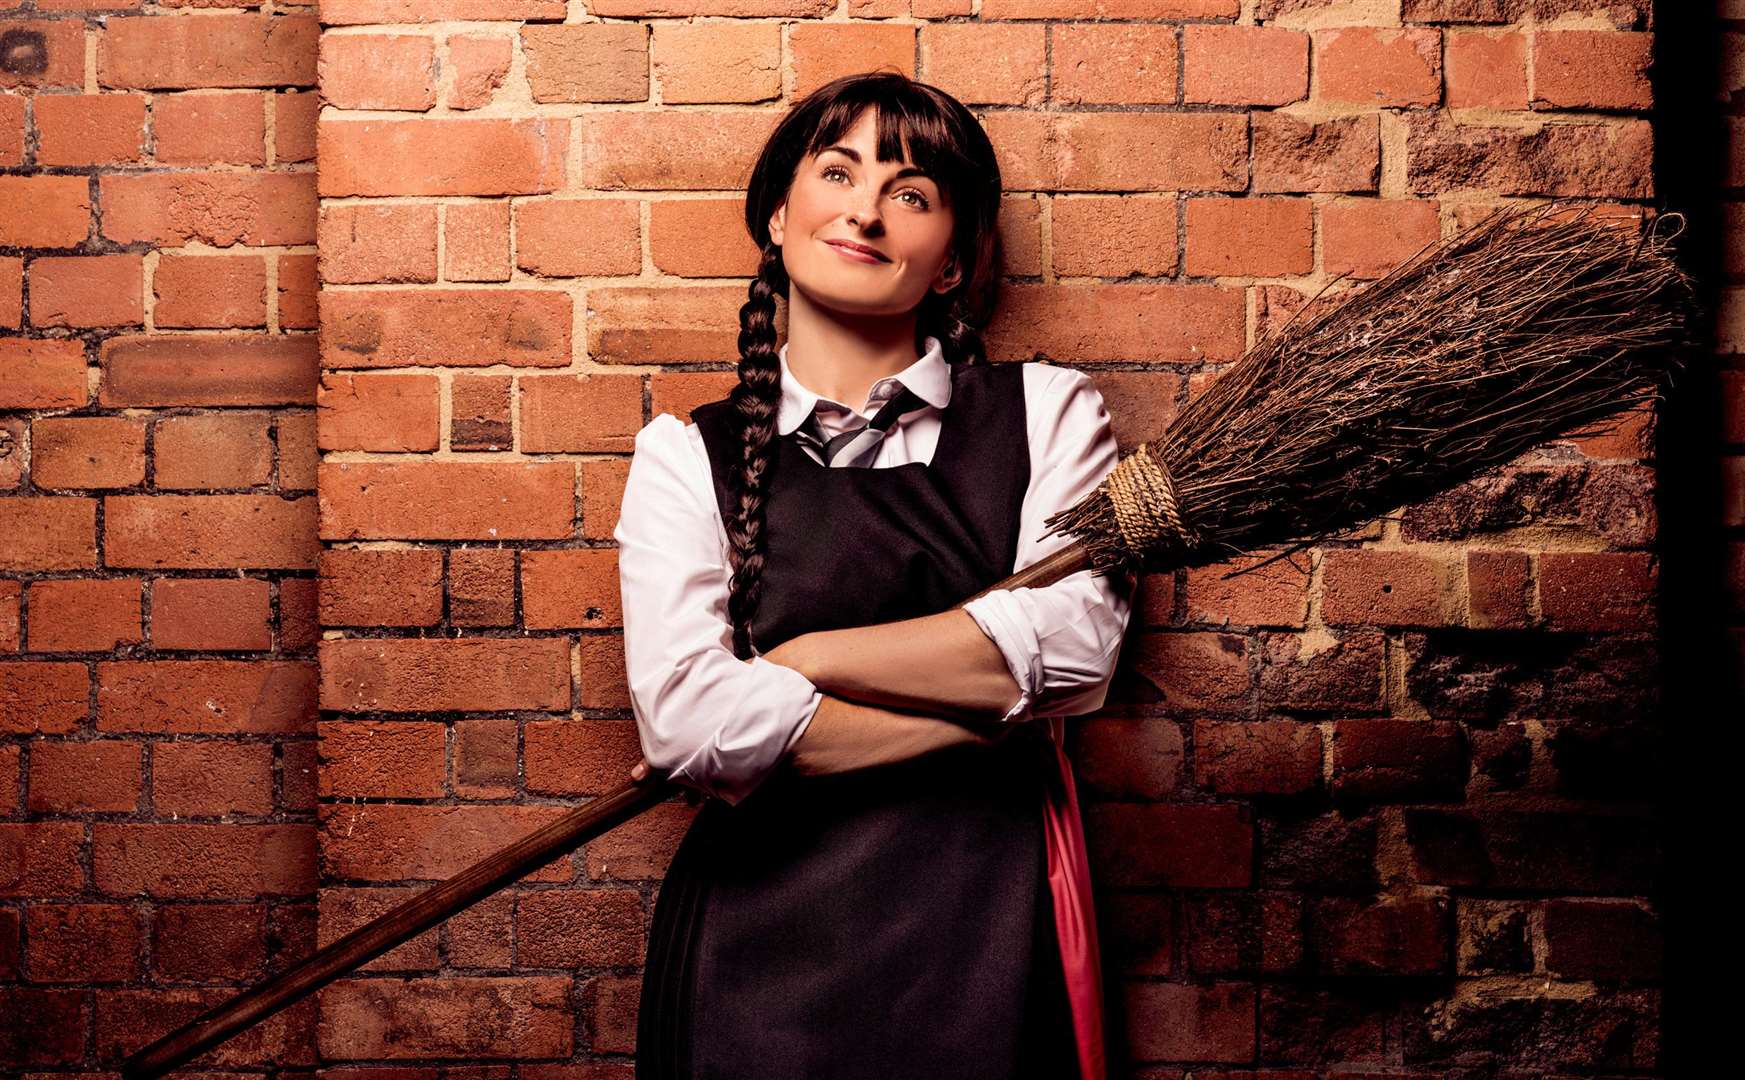 The Worst Witch is coming to Canterbury and Dartford Picture: Idil Sukan/Draw HQ